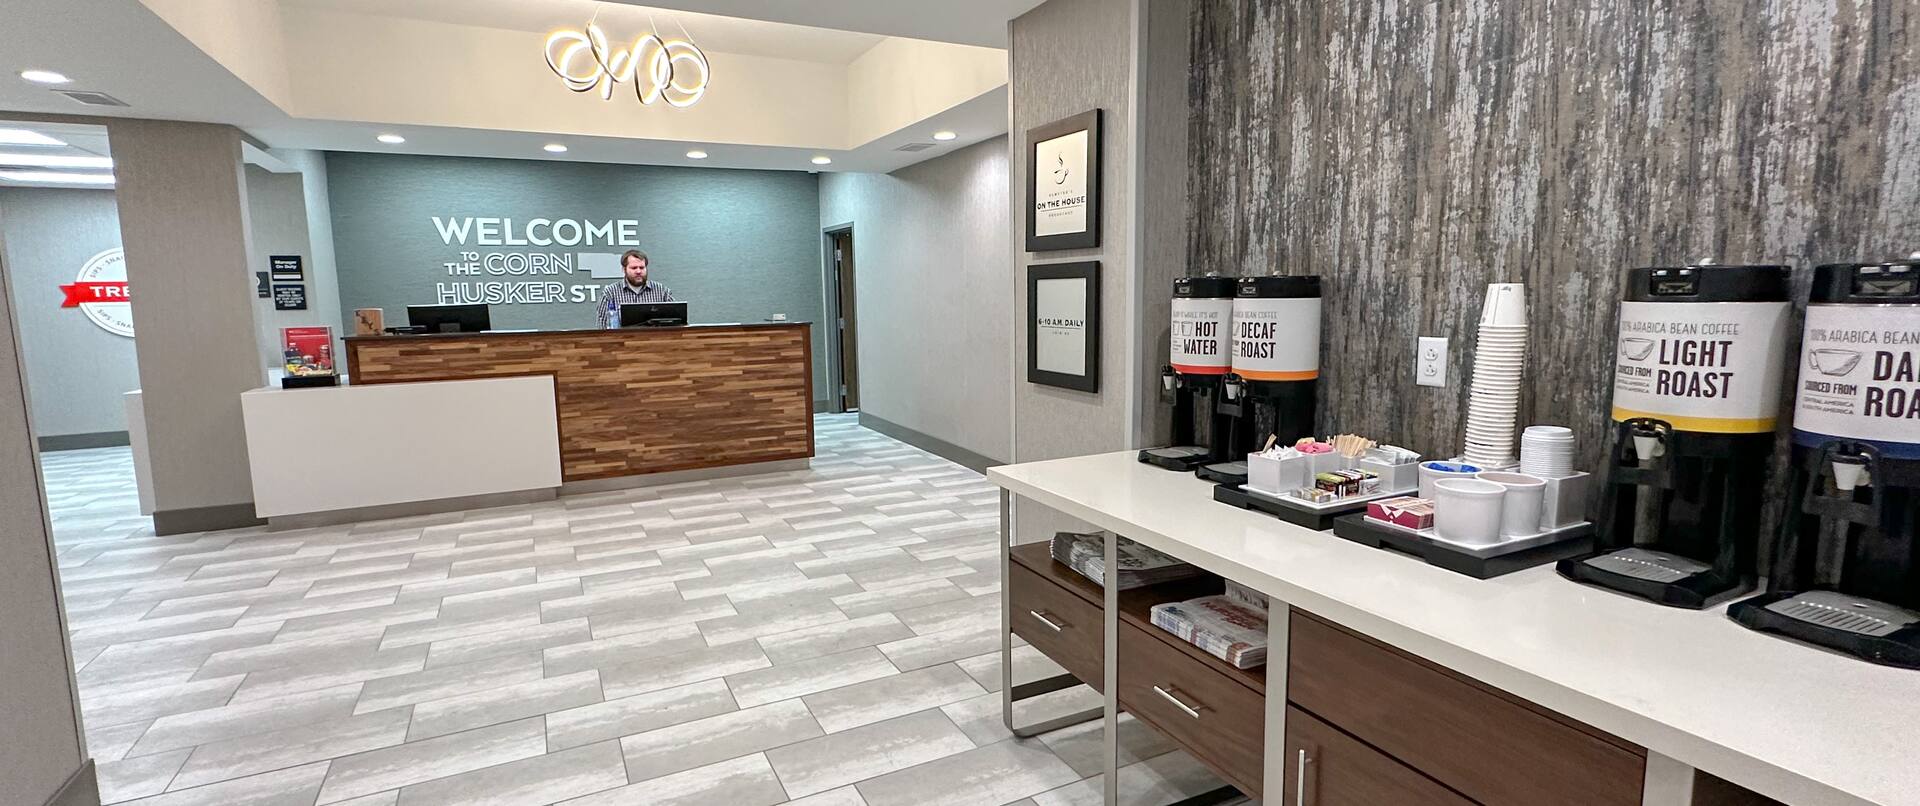 Reception Desk Area with Team Member and Close Up View of Coffee Service Area